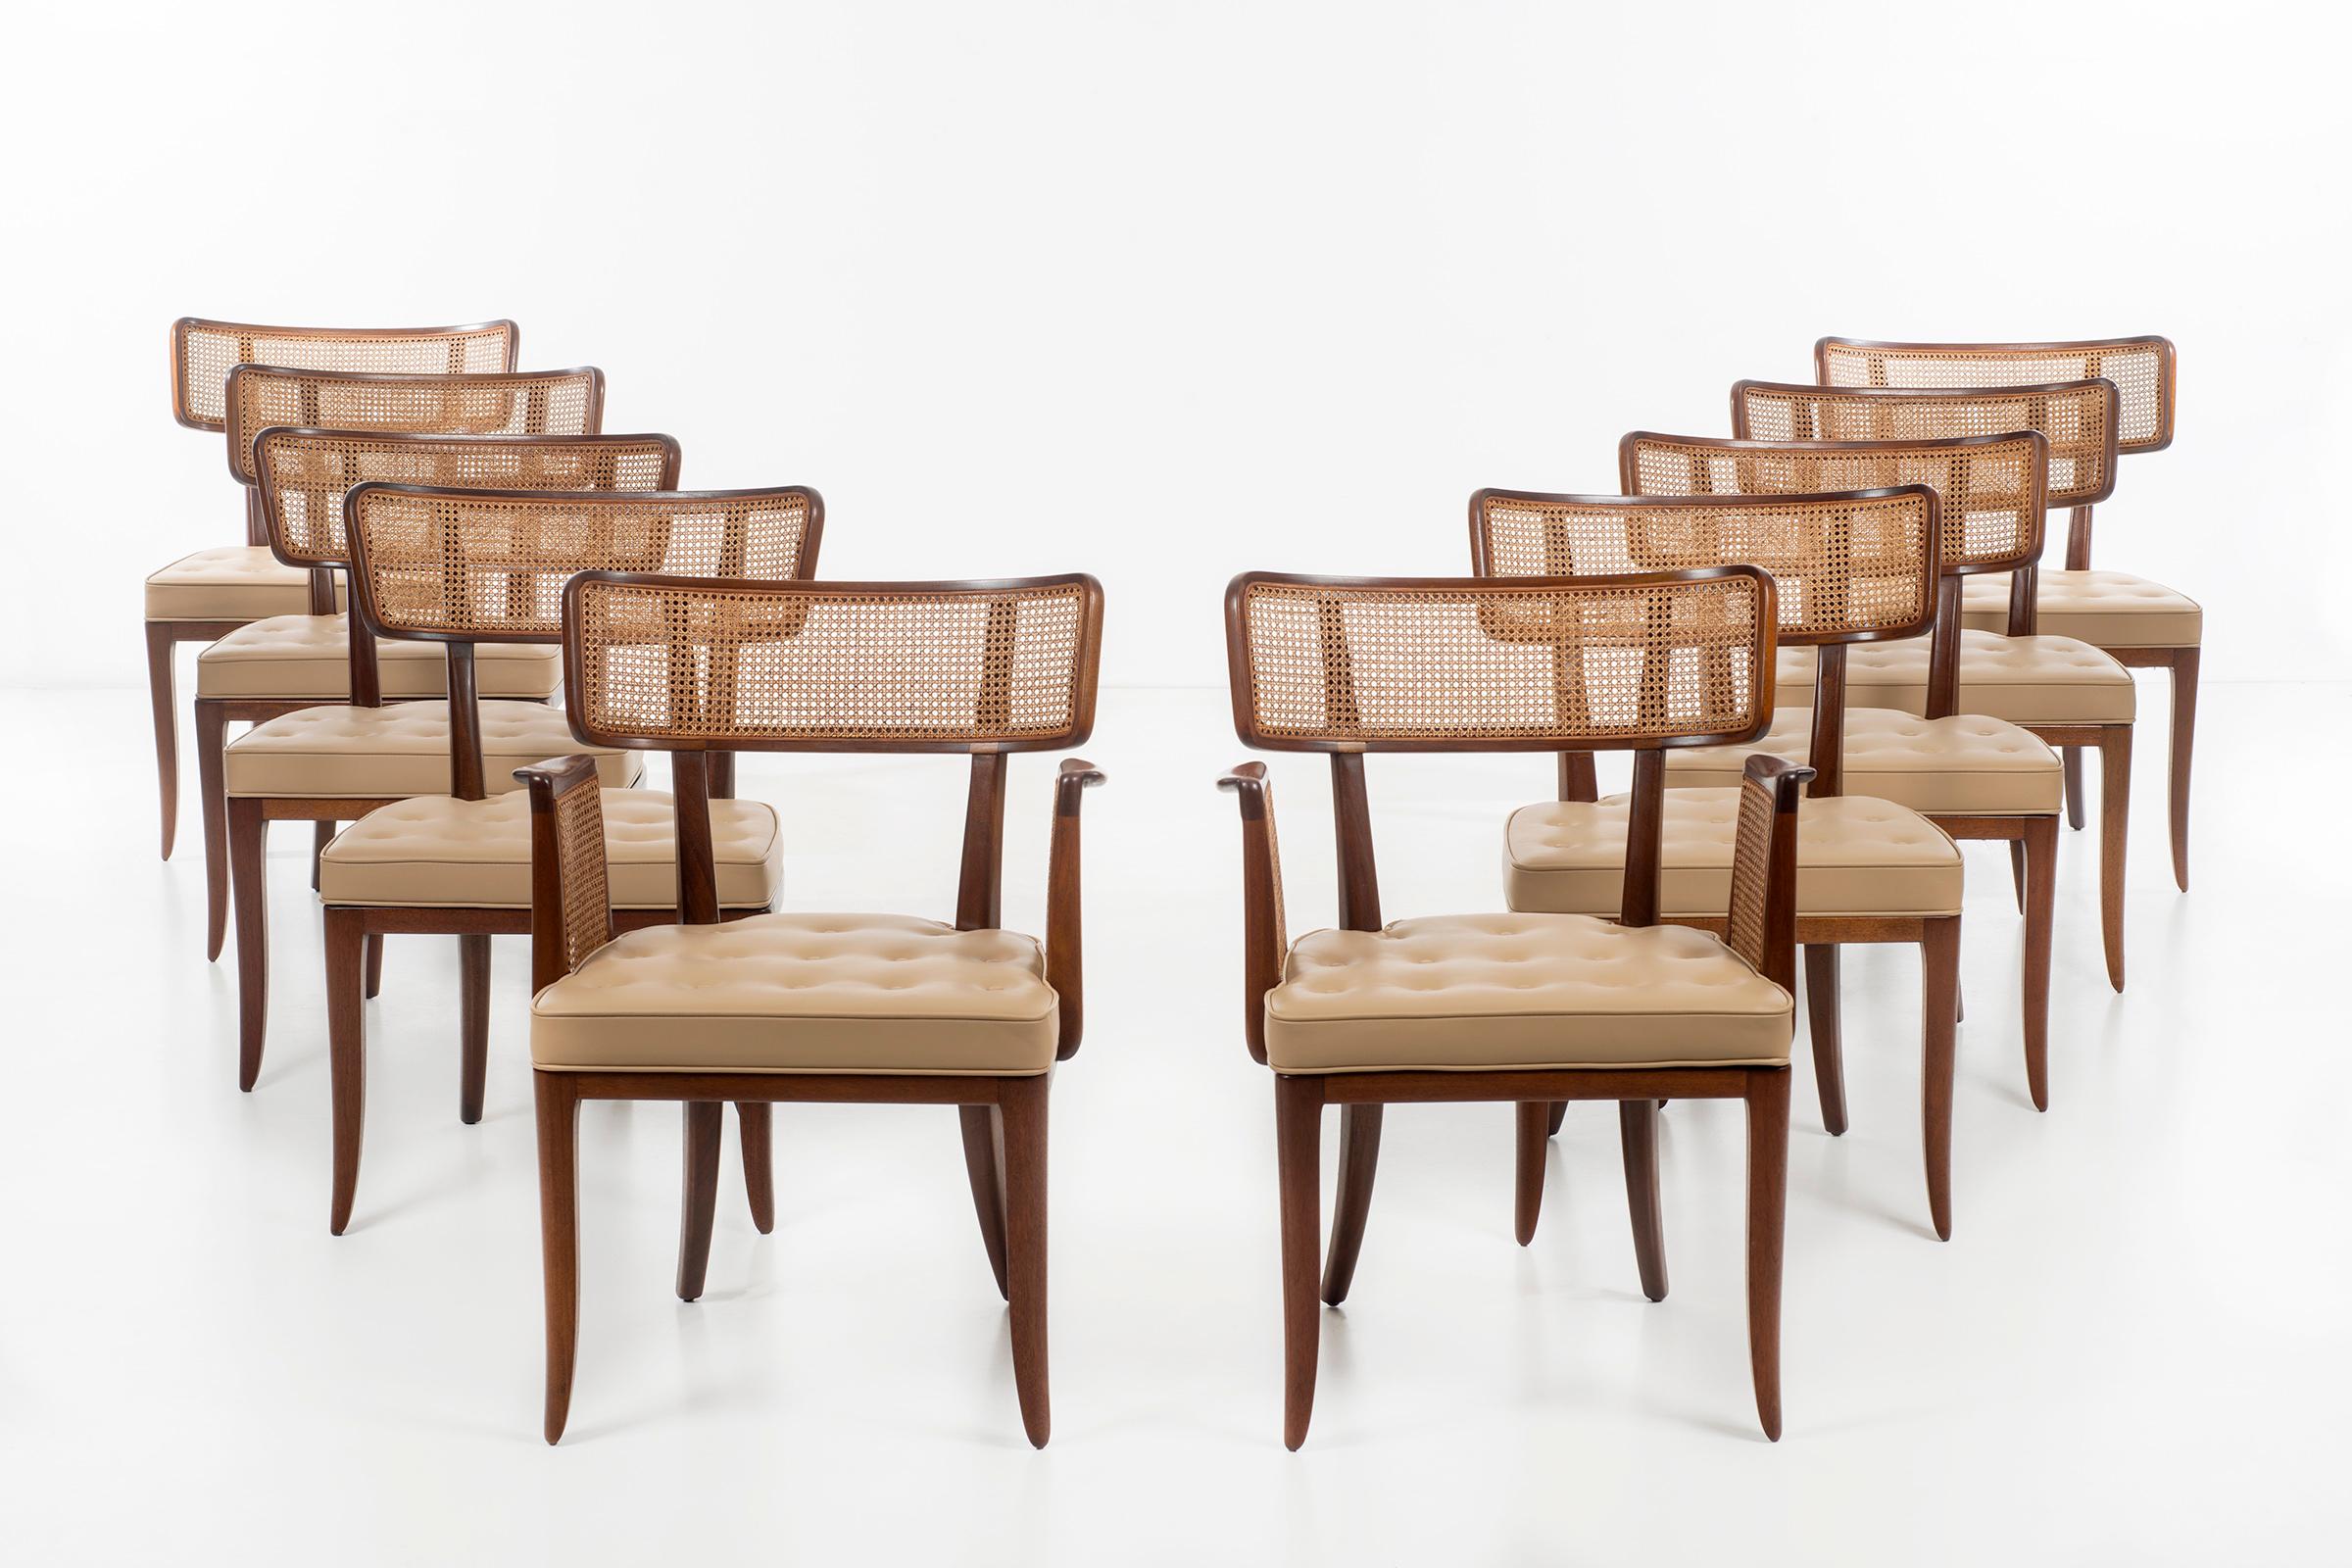 Rare large set of 10 Wormley for Dunbar, caneback dining chairs model no. 4580
8 side chairs and 2 armchairs.
Ergonomically enhanced back, spayed front legs and saber curved back legs, solid mahogany wood, professionally restored, reupholstered in